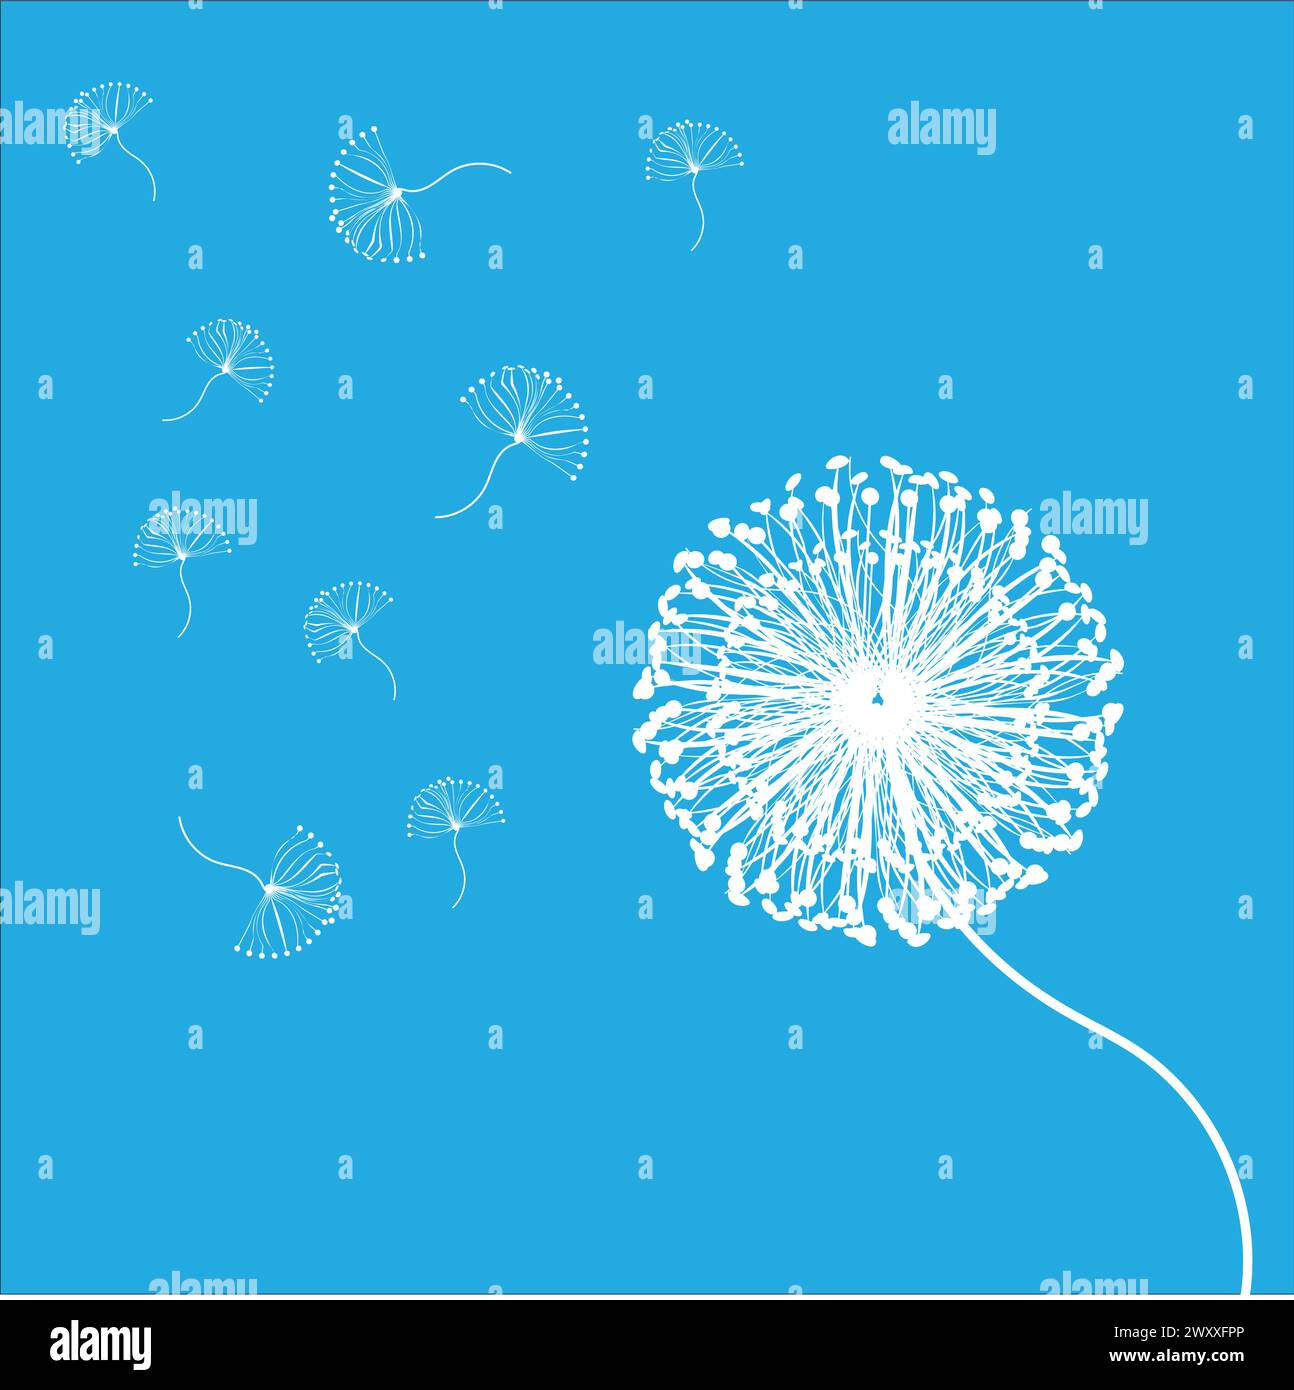 A close-up of a dandelion seed head with its white, fluffy seeds blowing away on a bright blue sky background. Stock Vector